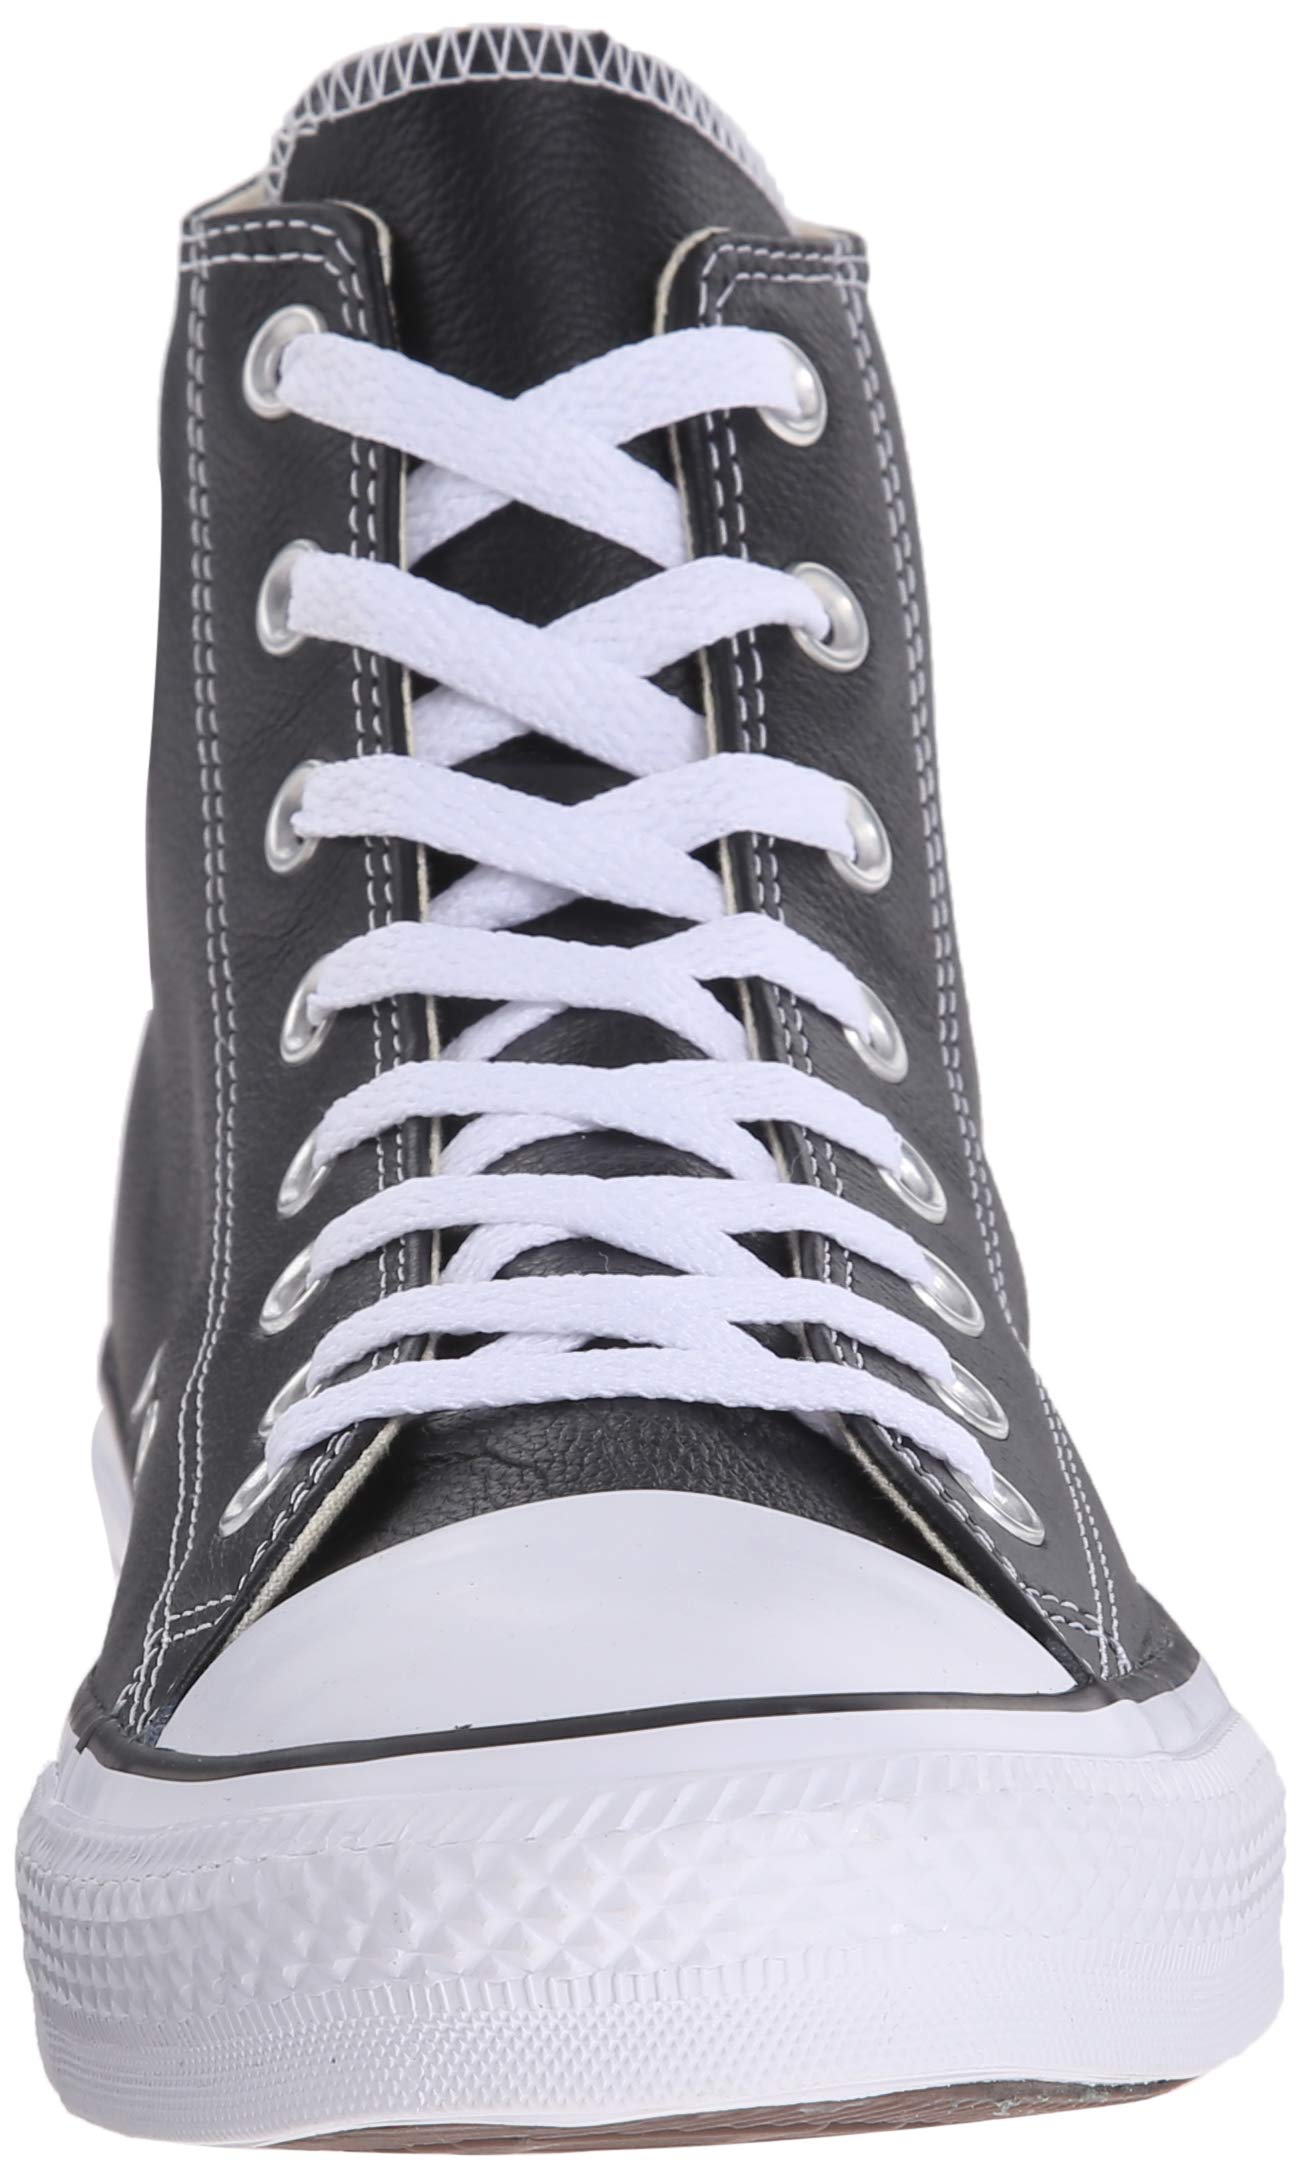 Converse Chuck Taylor All Star Hi Leather Sneakers Black - image 4 of 8